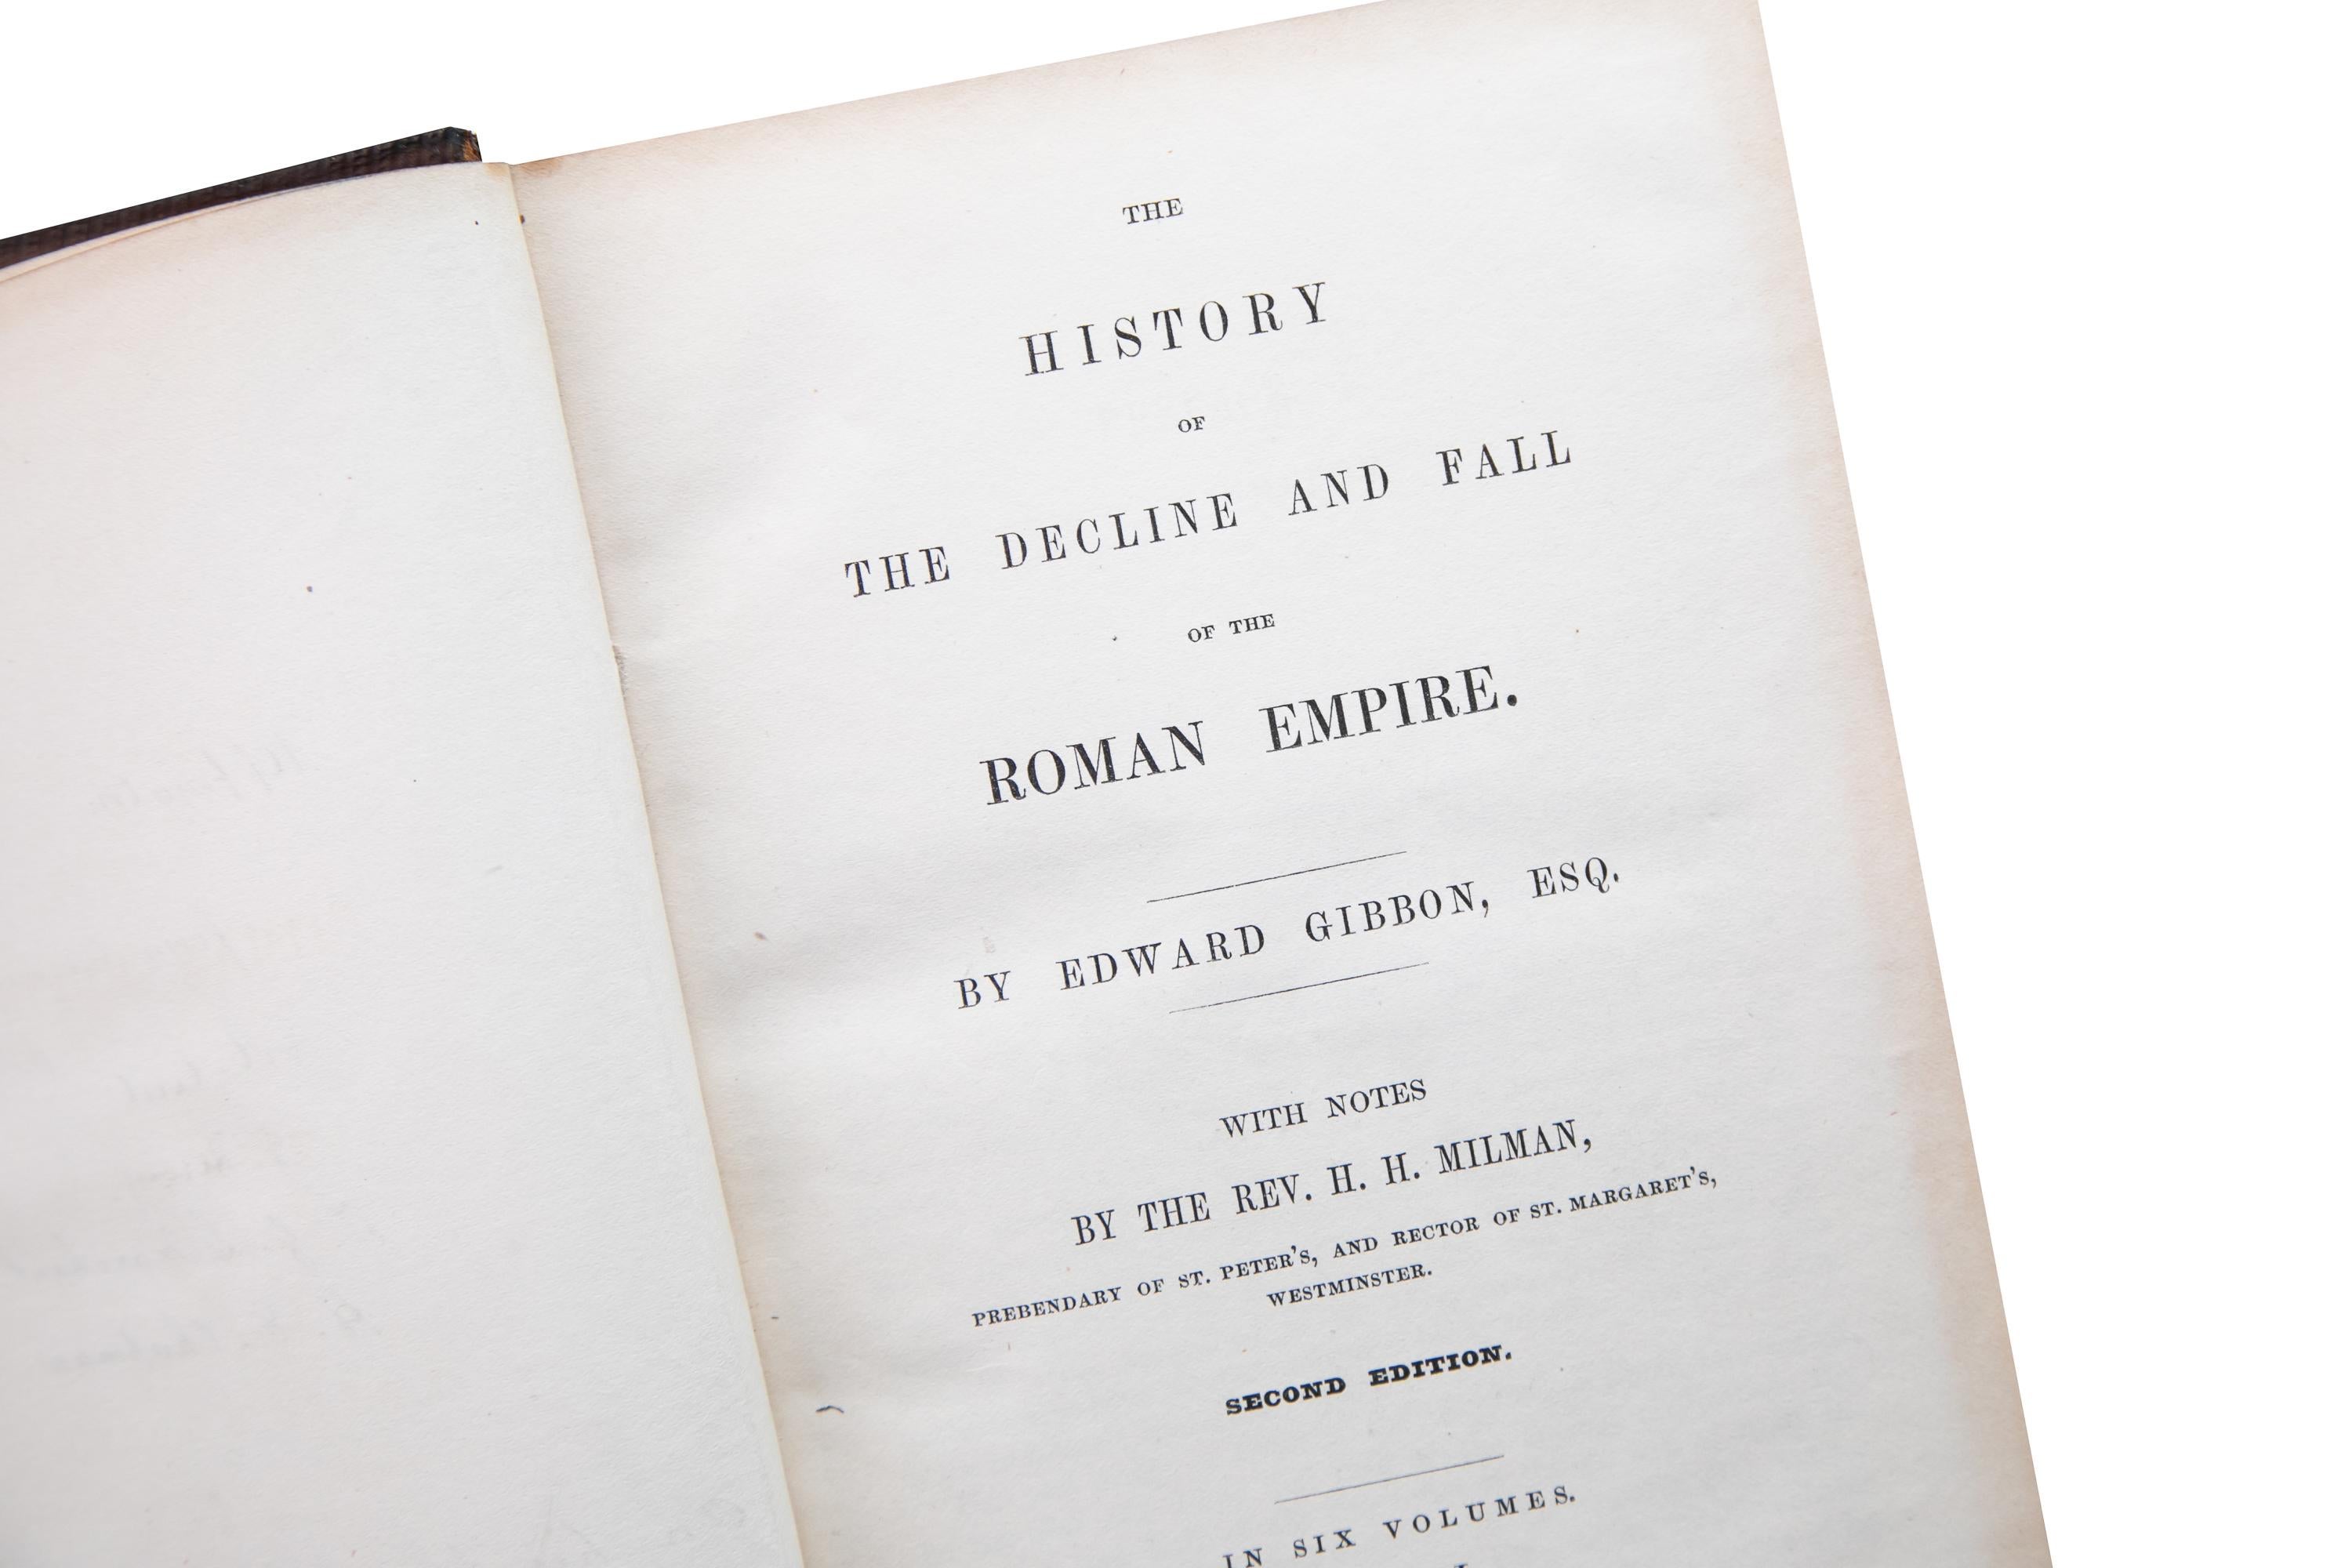 English 6 Vols. Edward Gibbon, The History of the Decline and Fall of the Roman Empire.